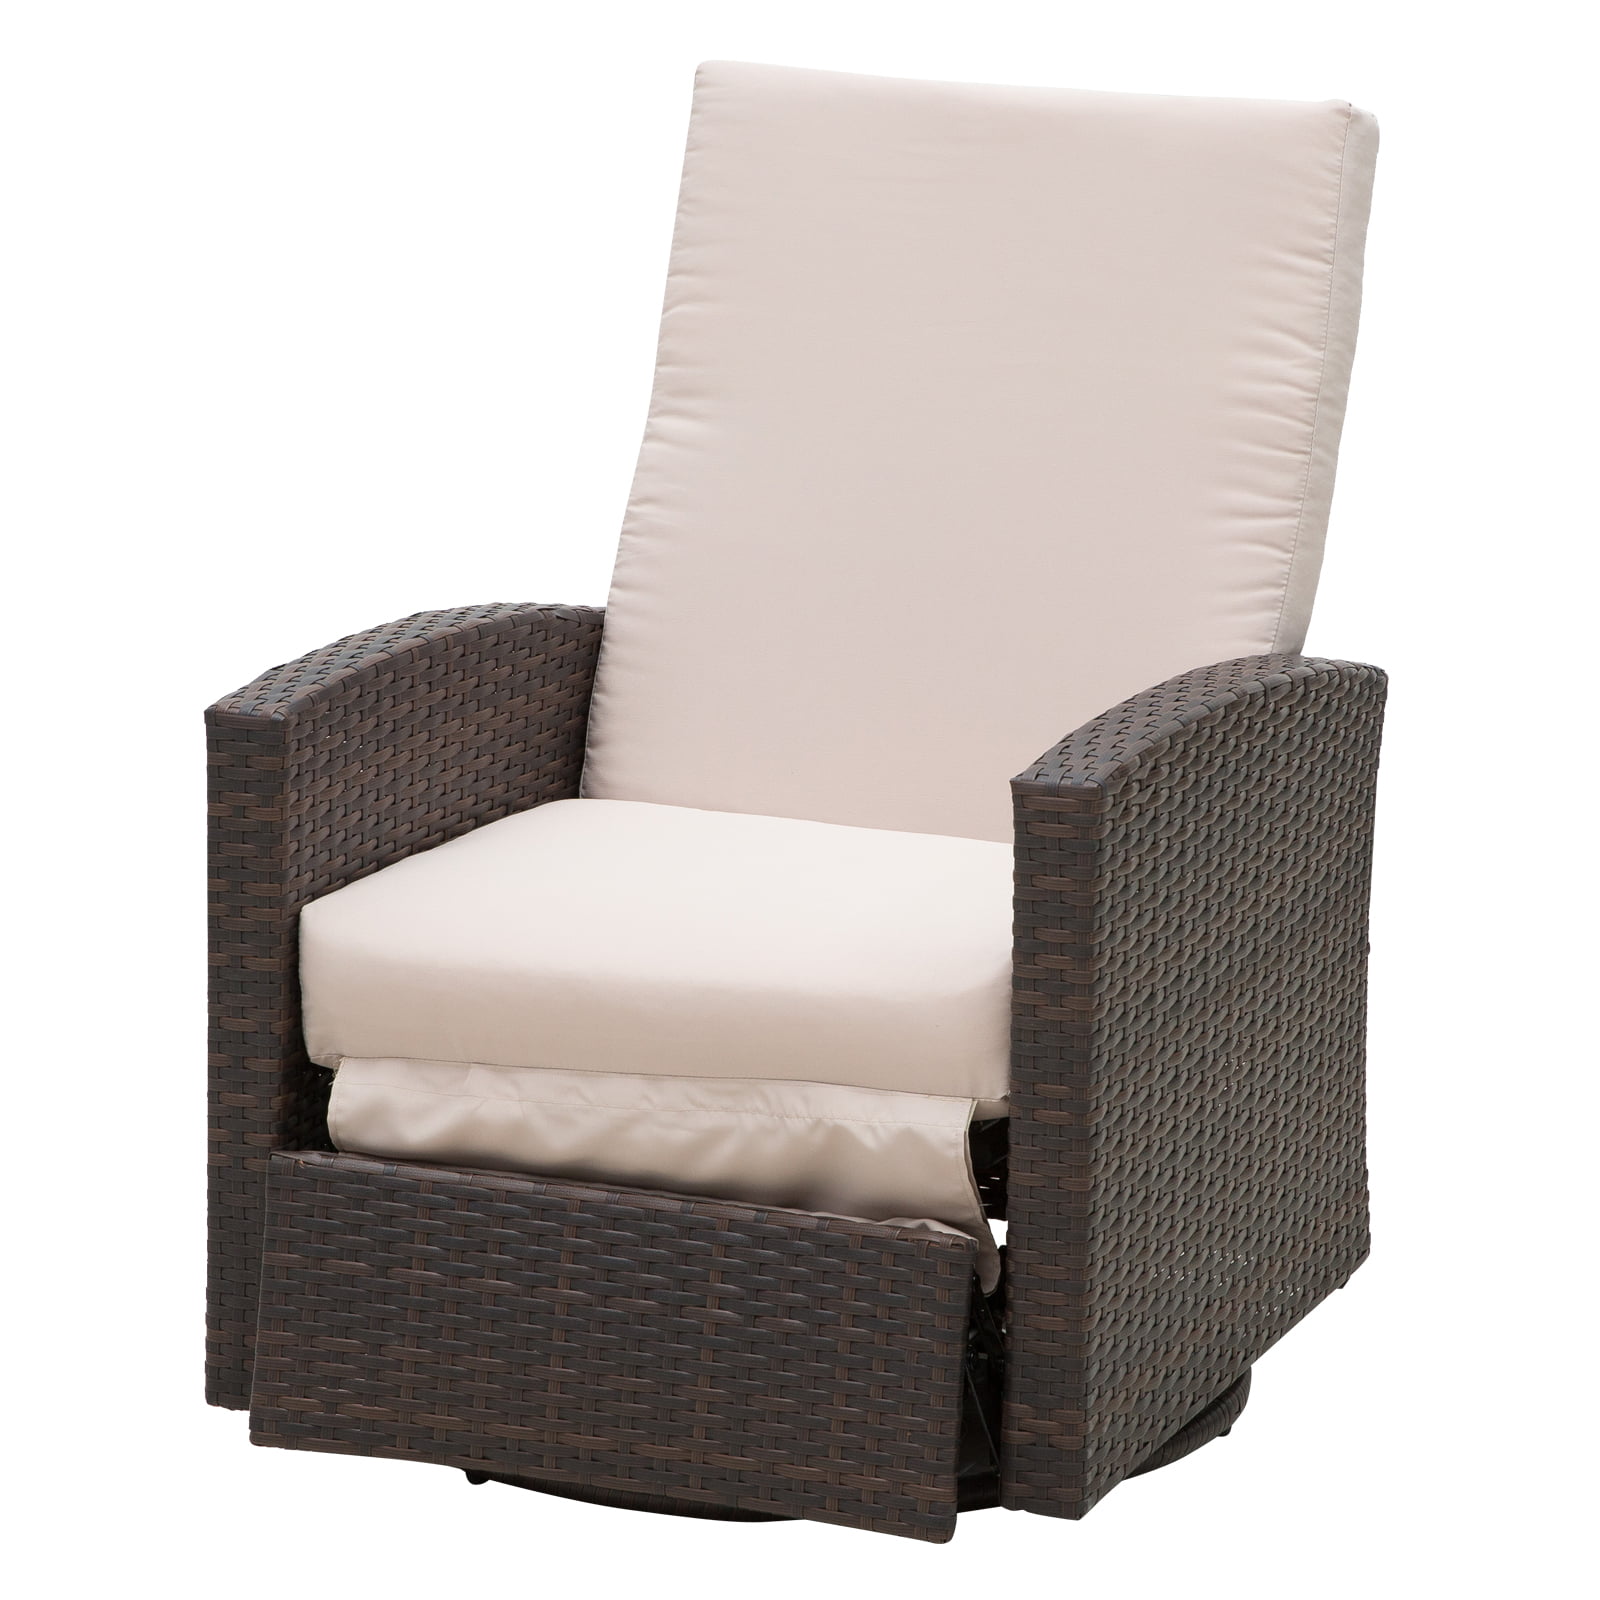 Outsunny Outdoor Rattan Wicker Swivel, Outsunny Outdoor Rattan Recliner Chair With Cushion